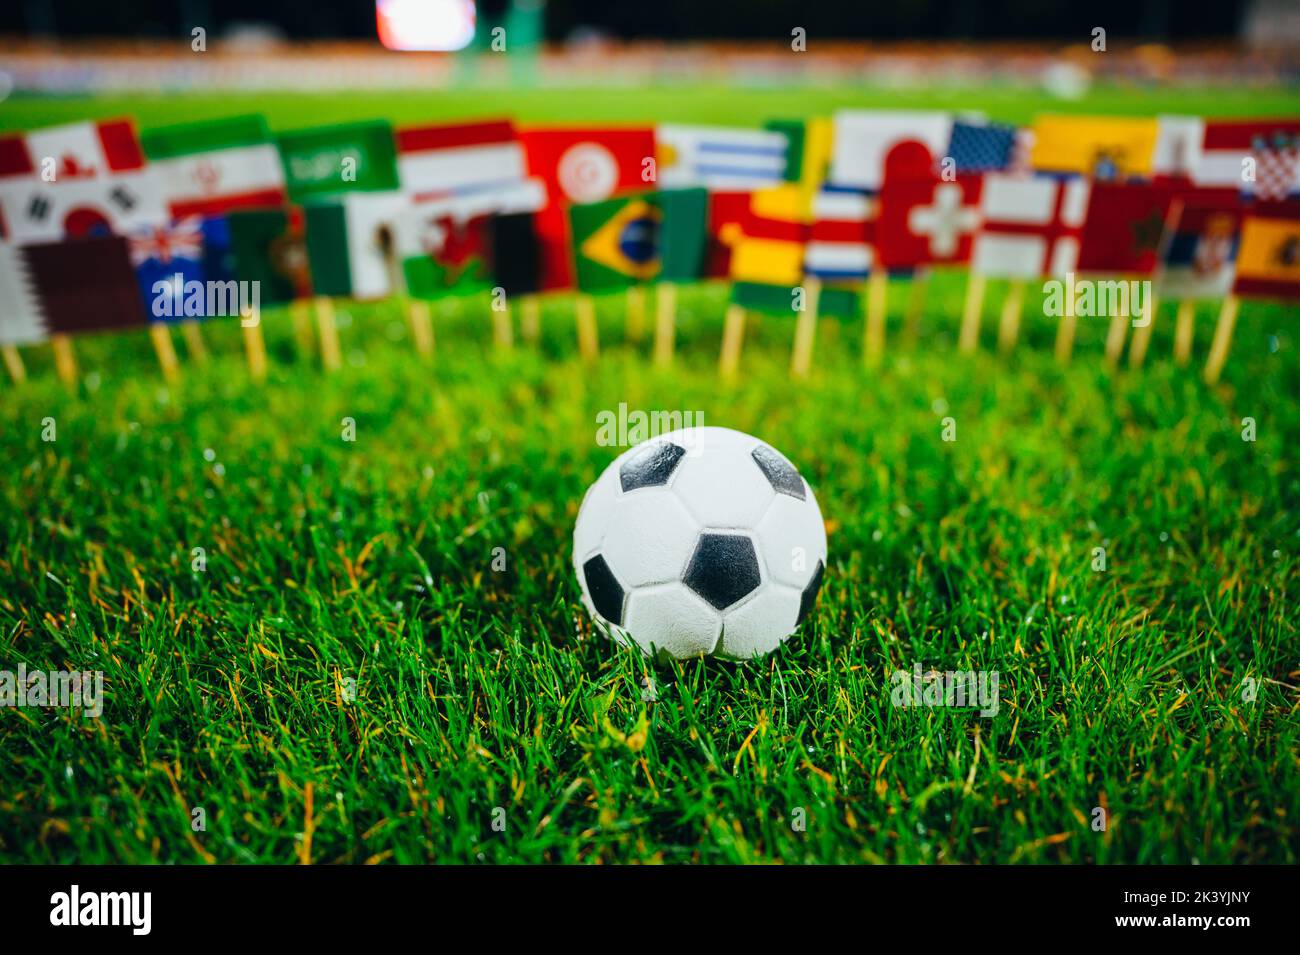 Football tournament. International games. Sport photo. Football ball and nationals flag including flag of Qatar, Brazil, Germany, France and others fo Stock Photo